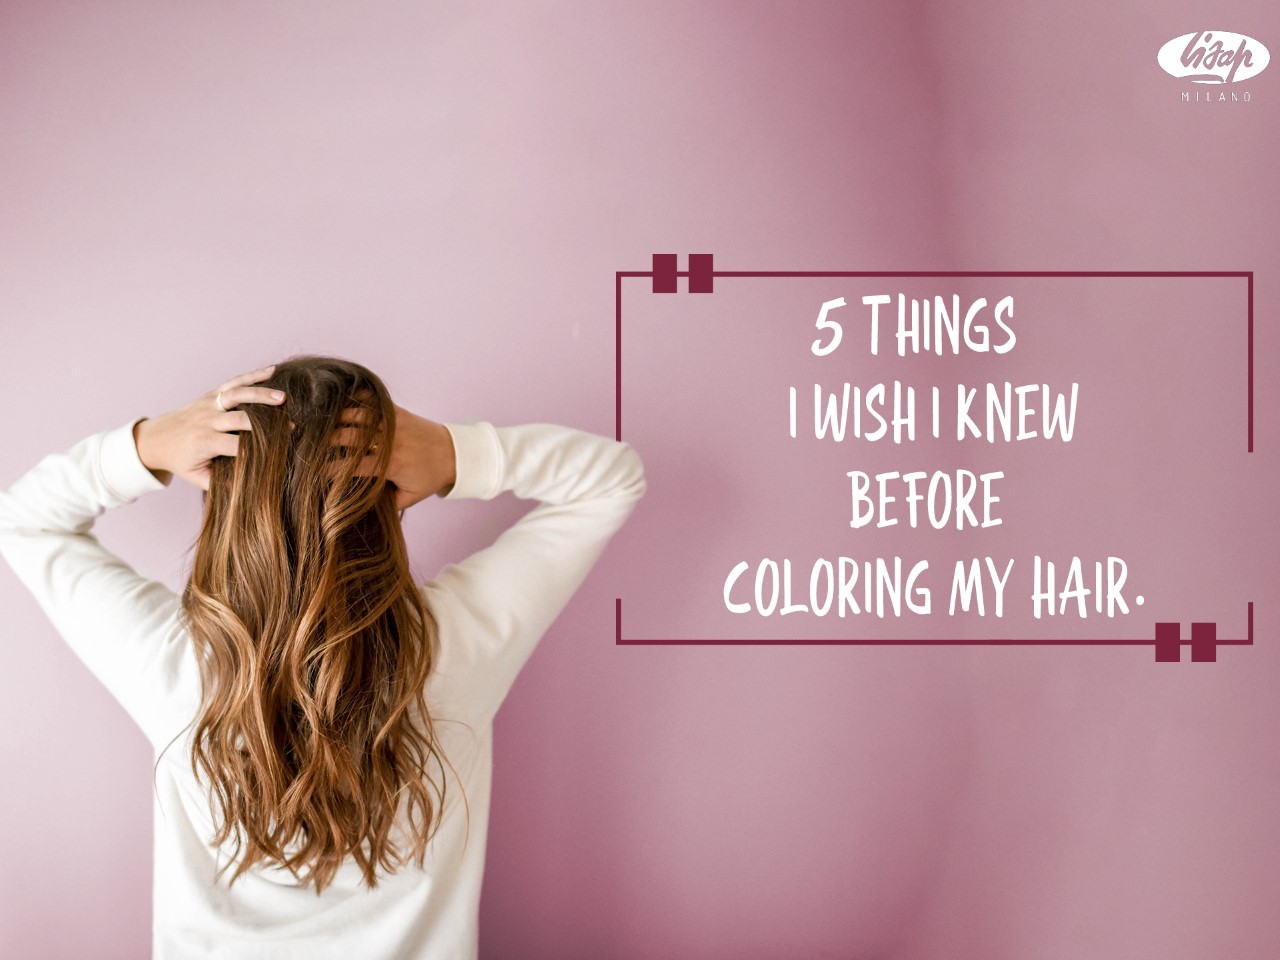 5 things I wish I knew before coloring my hair